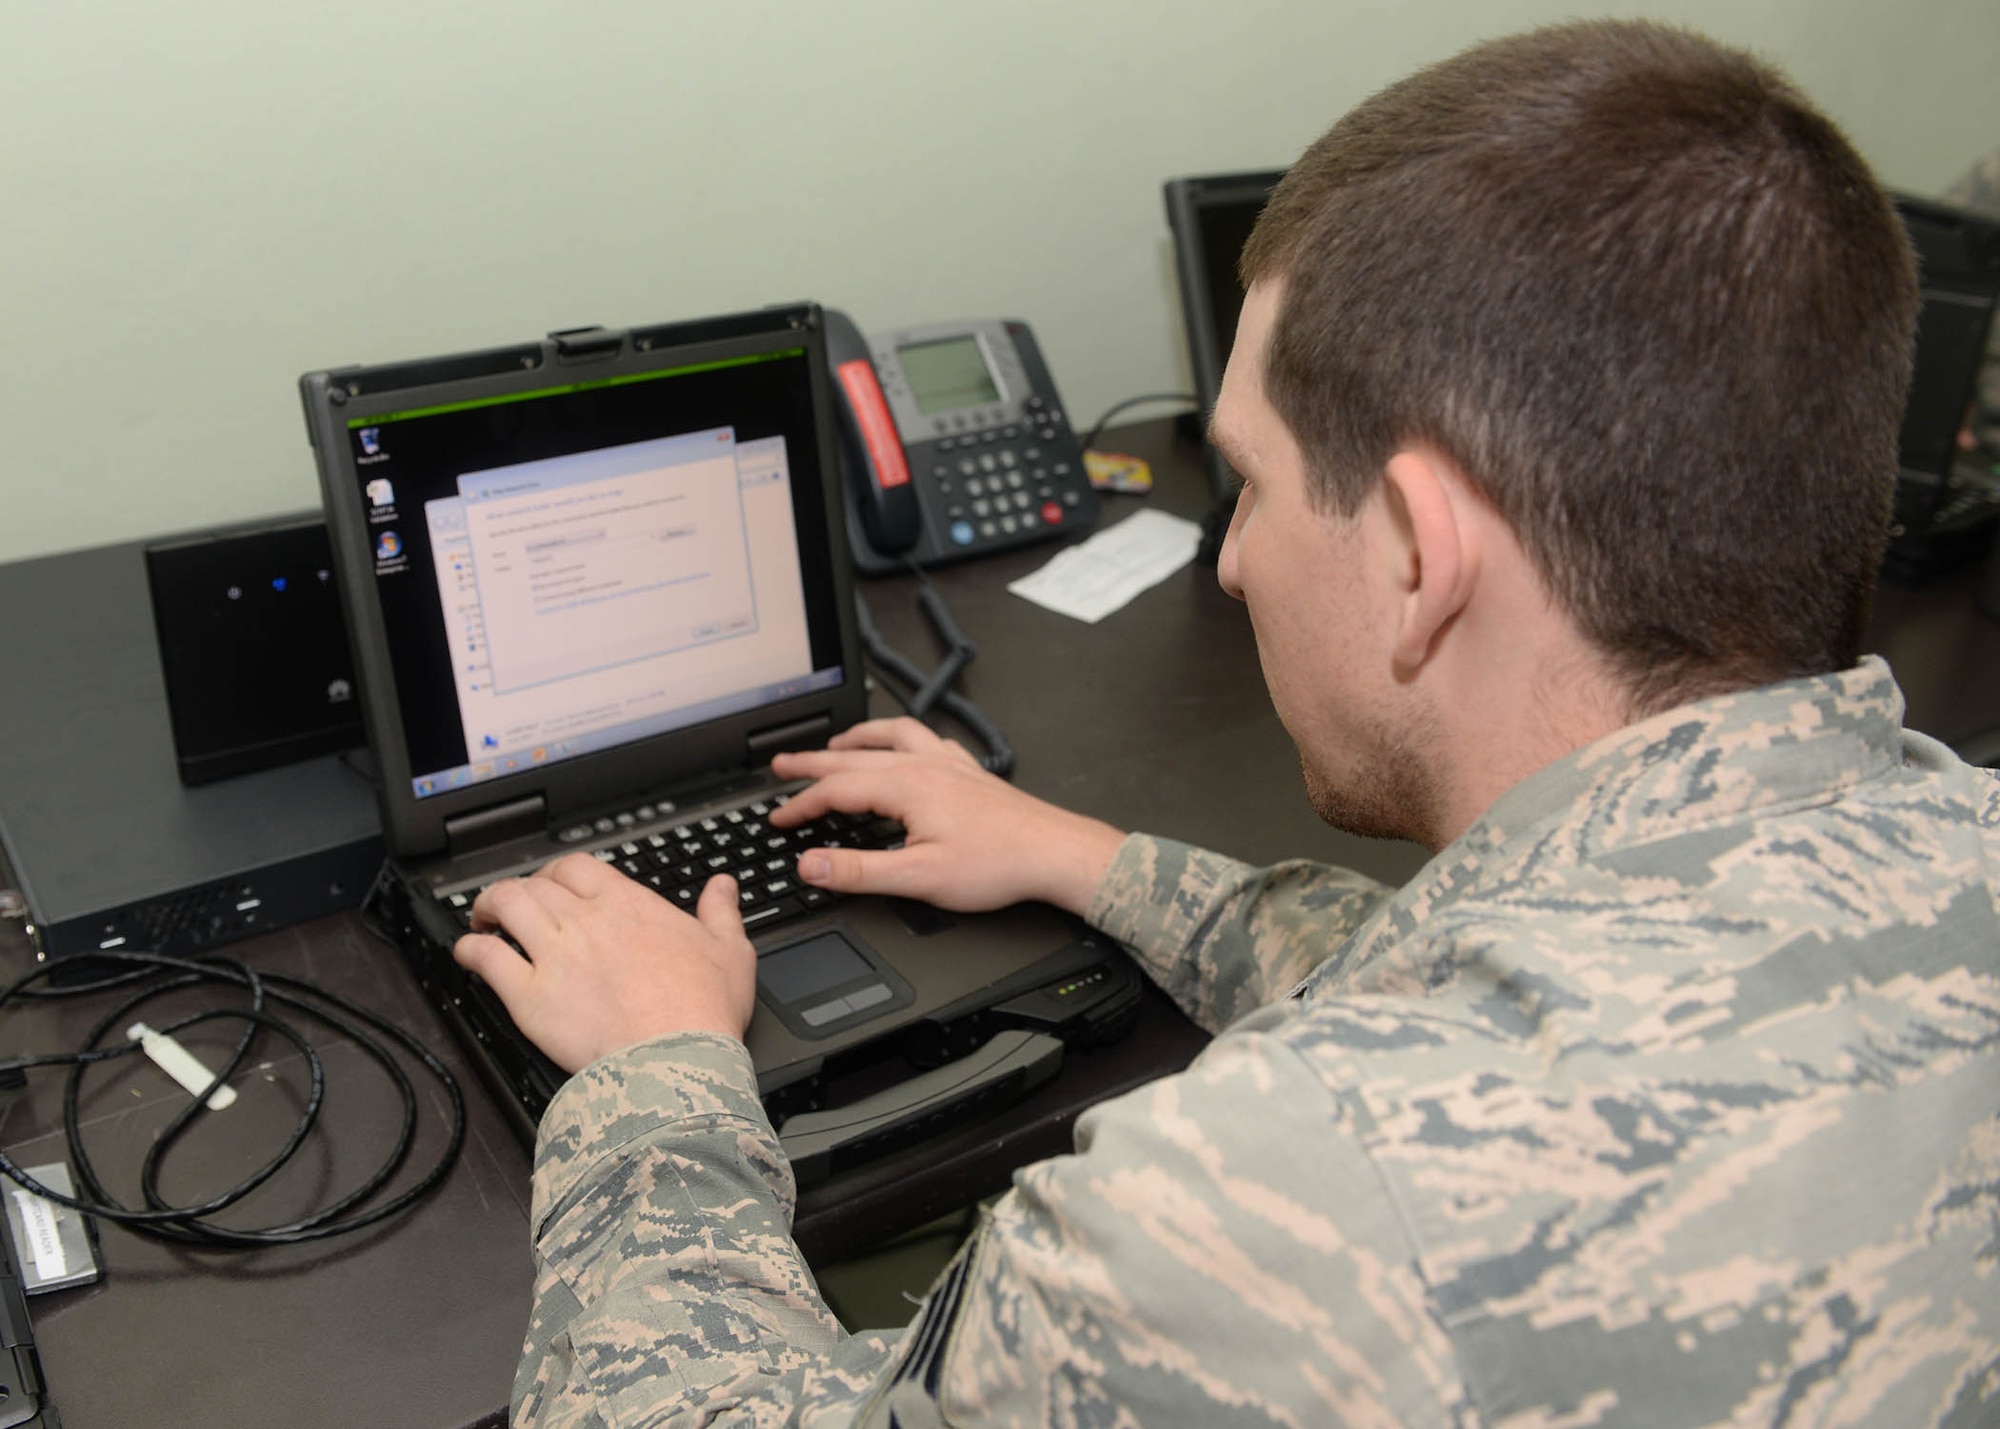 U.S. Air Force Senior Airman Joshua Marsh, a cyber systems operator with the 51st Combat Communications Squadron out of Robins Air Force Base, Ga., fixes a software problem on a government laptop during NEW HORIZONS 2017 in Arroyo Cano, Dominican Republic, April 13, 2017. Both software and hardware must be properly maintained in order to stay fully operational. (U.S. Air Force photo by Staff Sgt. Timothy M. Young)